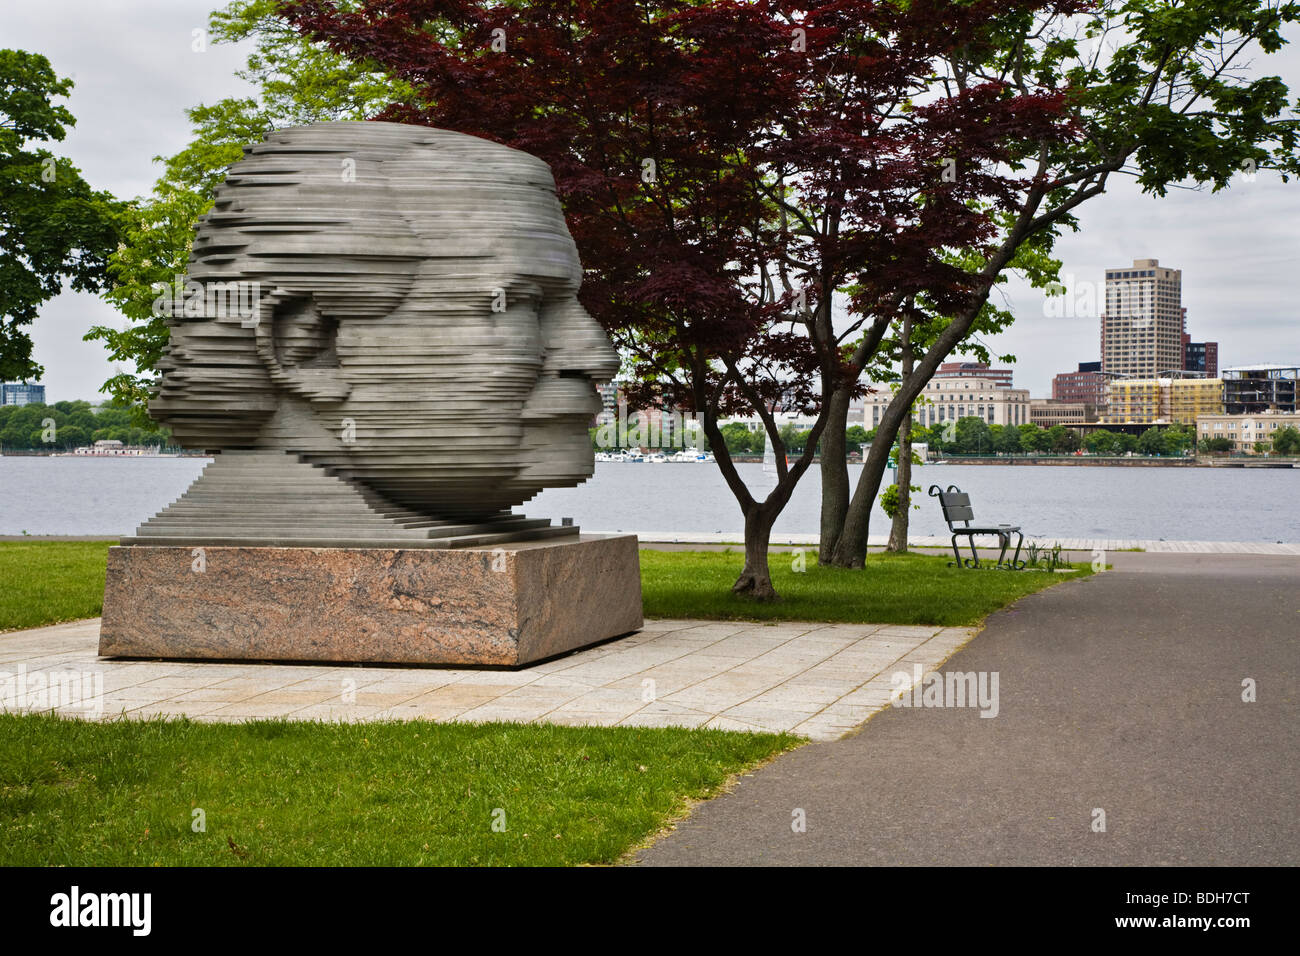 A statue of ARTHUR FIEDLER the conductor of the Boston Pops orchestra in CHARLES RIVER PARK - BOSTON, MASSACHUSETTS Stock Photo